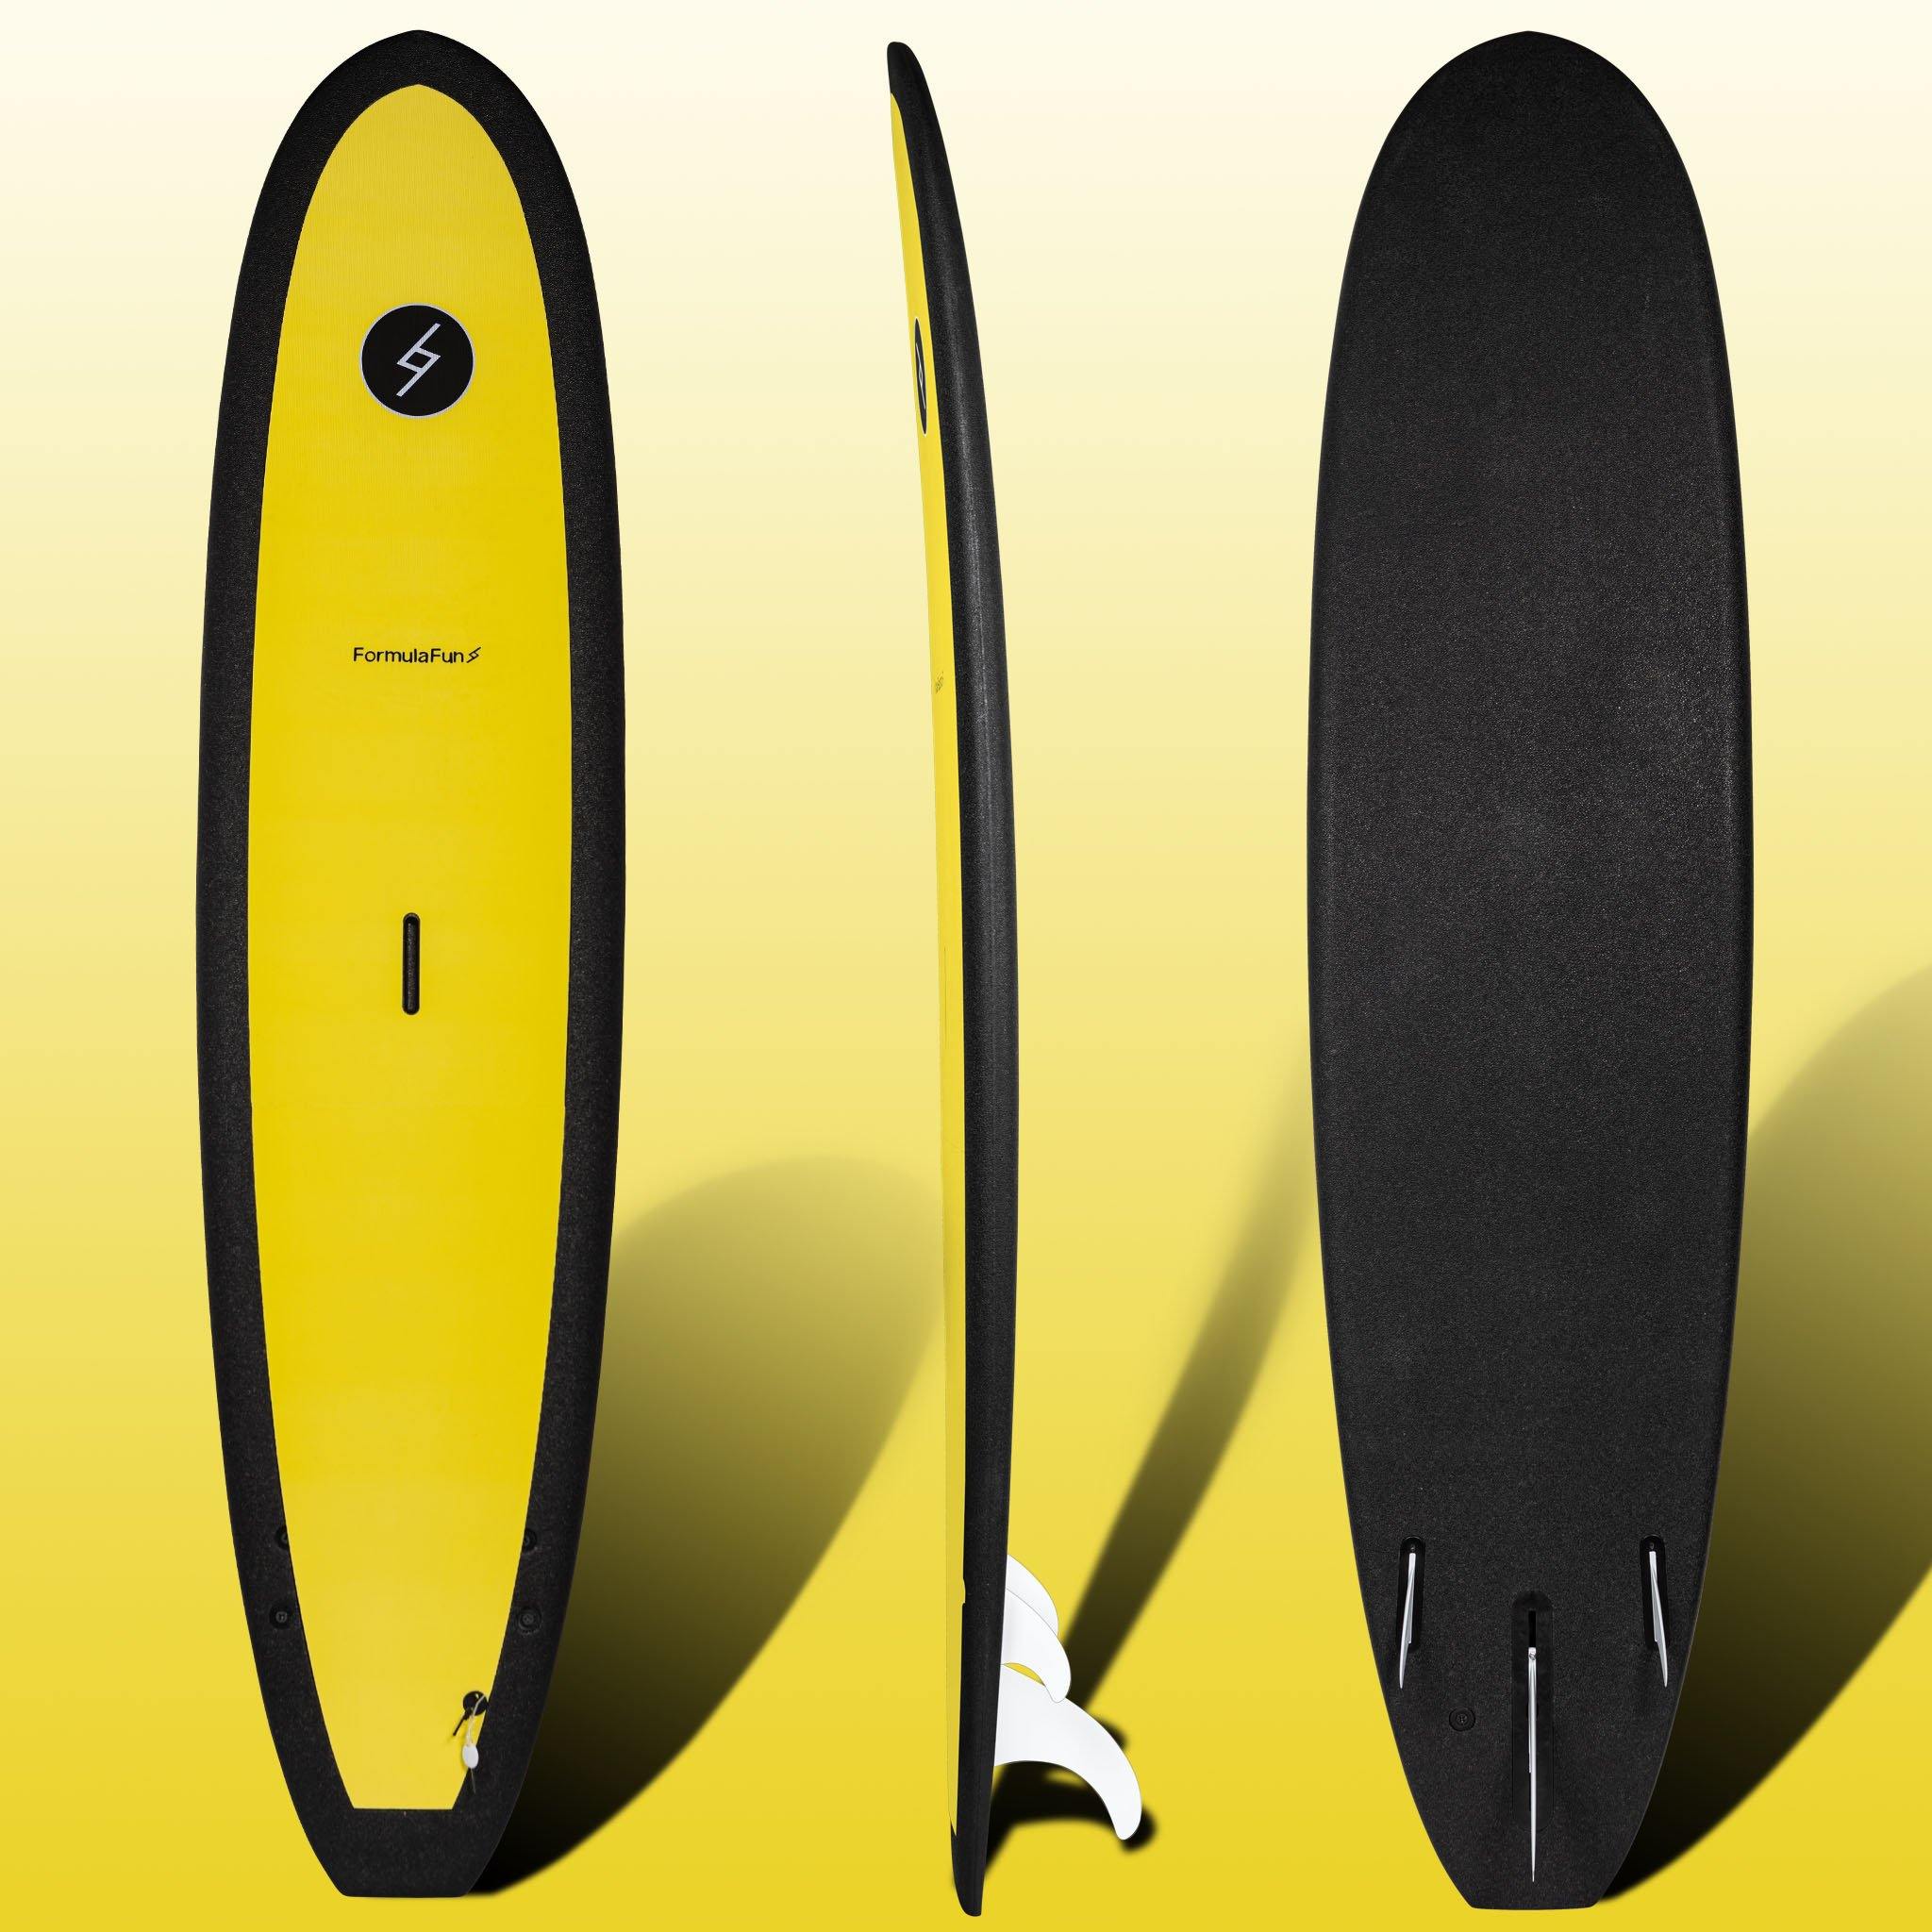 Front, profile and back of a yellow 7 foot 10 inch Formula Fun Foamies DOHO surfboard on a yellow shaded background